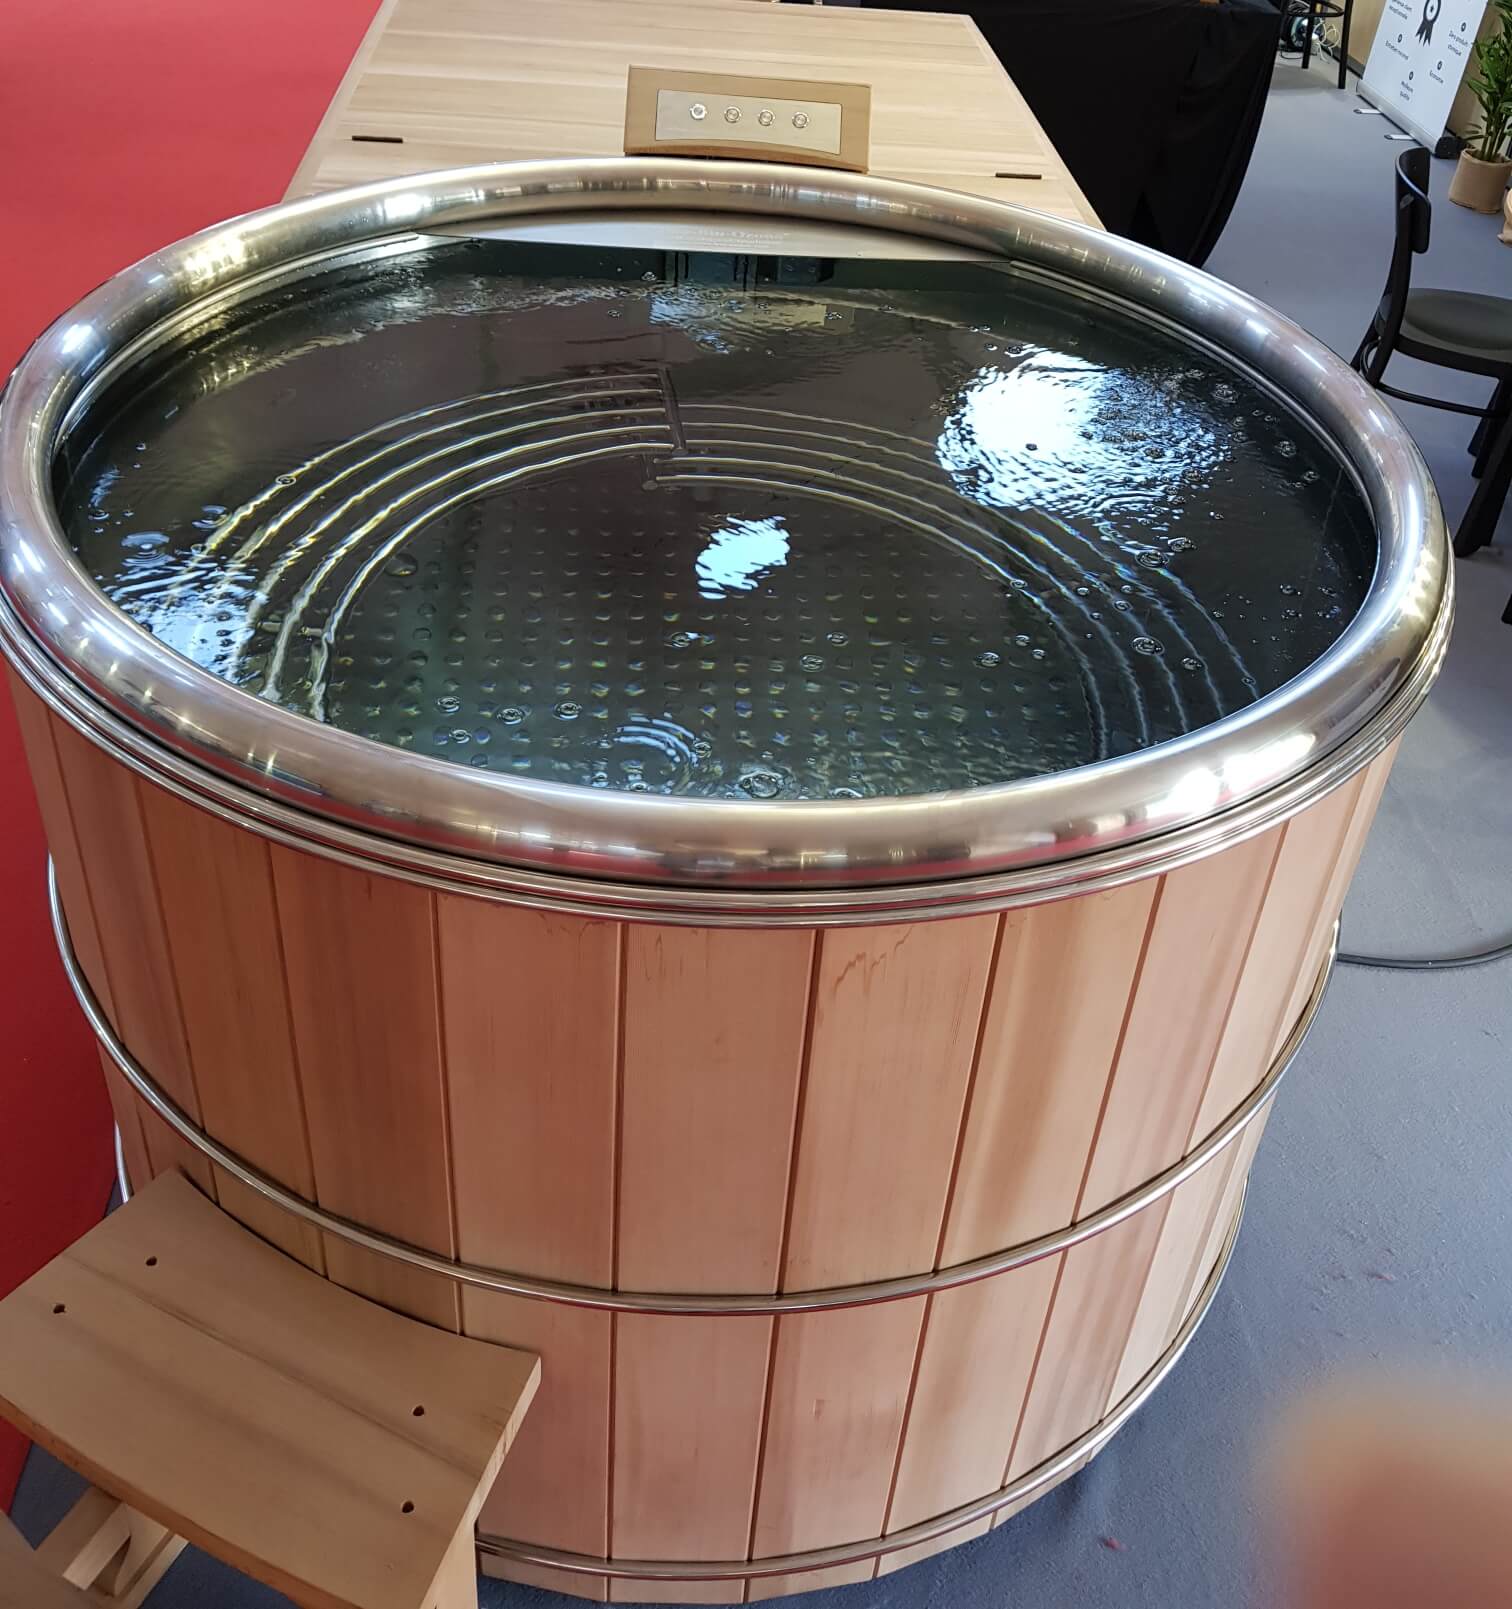 Stainless steel Hot tub, installation bain nordique storvatt, installation bain nordique, installation spa